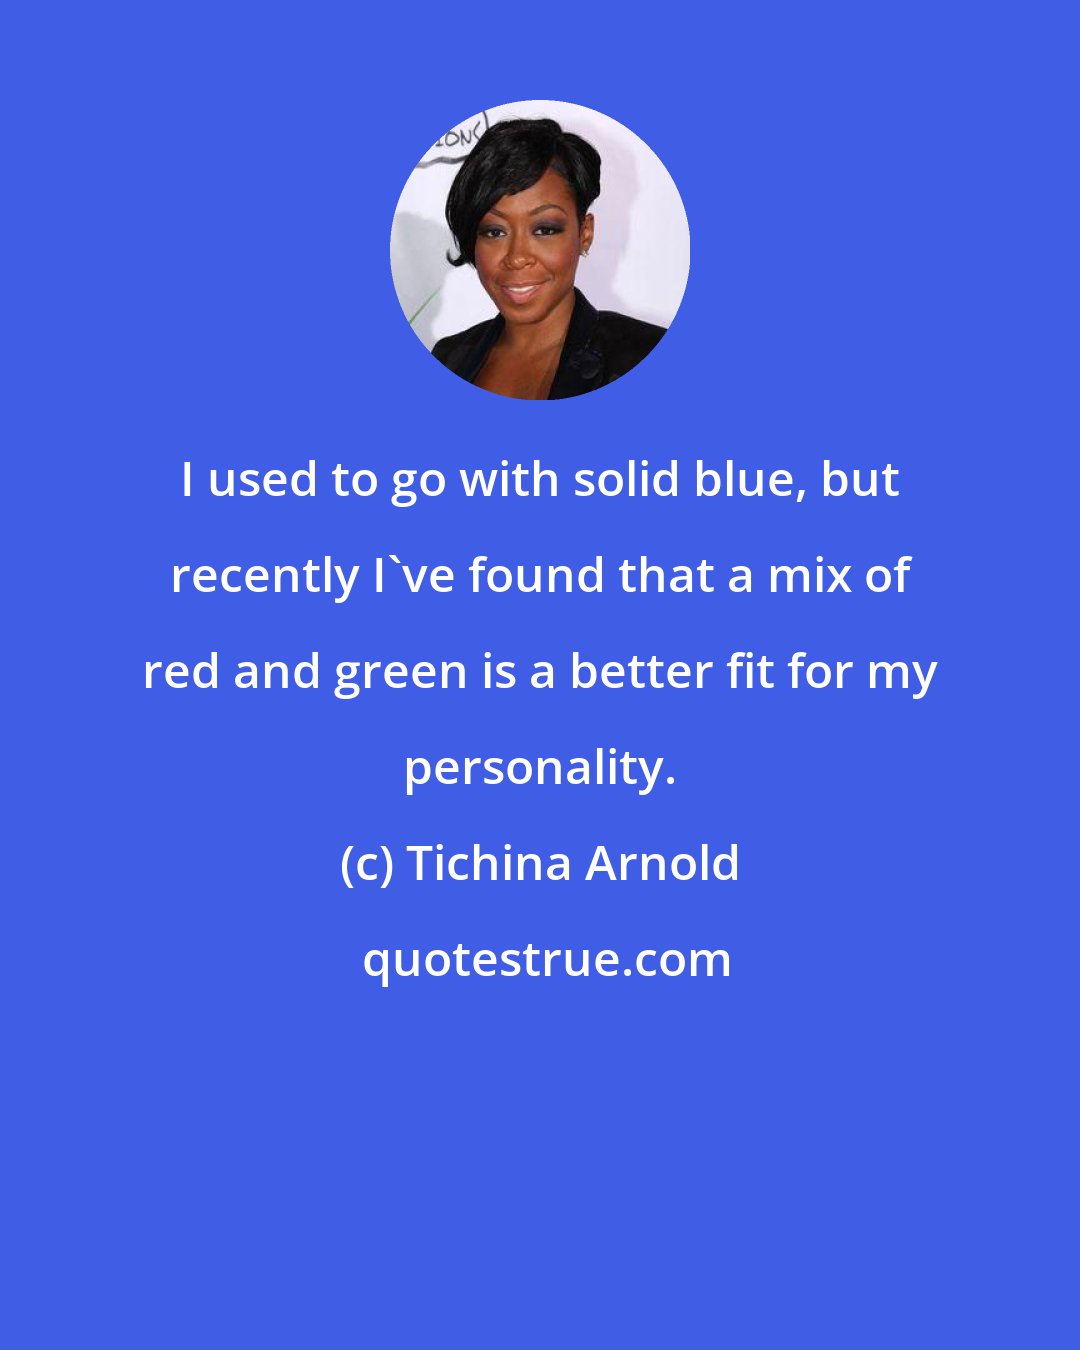 Tichina Arnold: I used to go with solid blue, but recently I've found that a mix of red and green is a better fit for my personality.